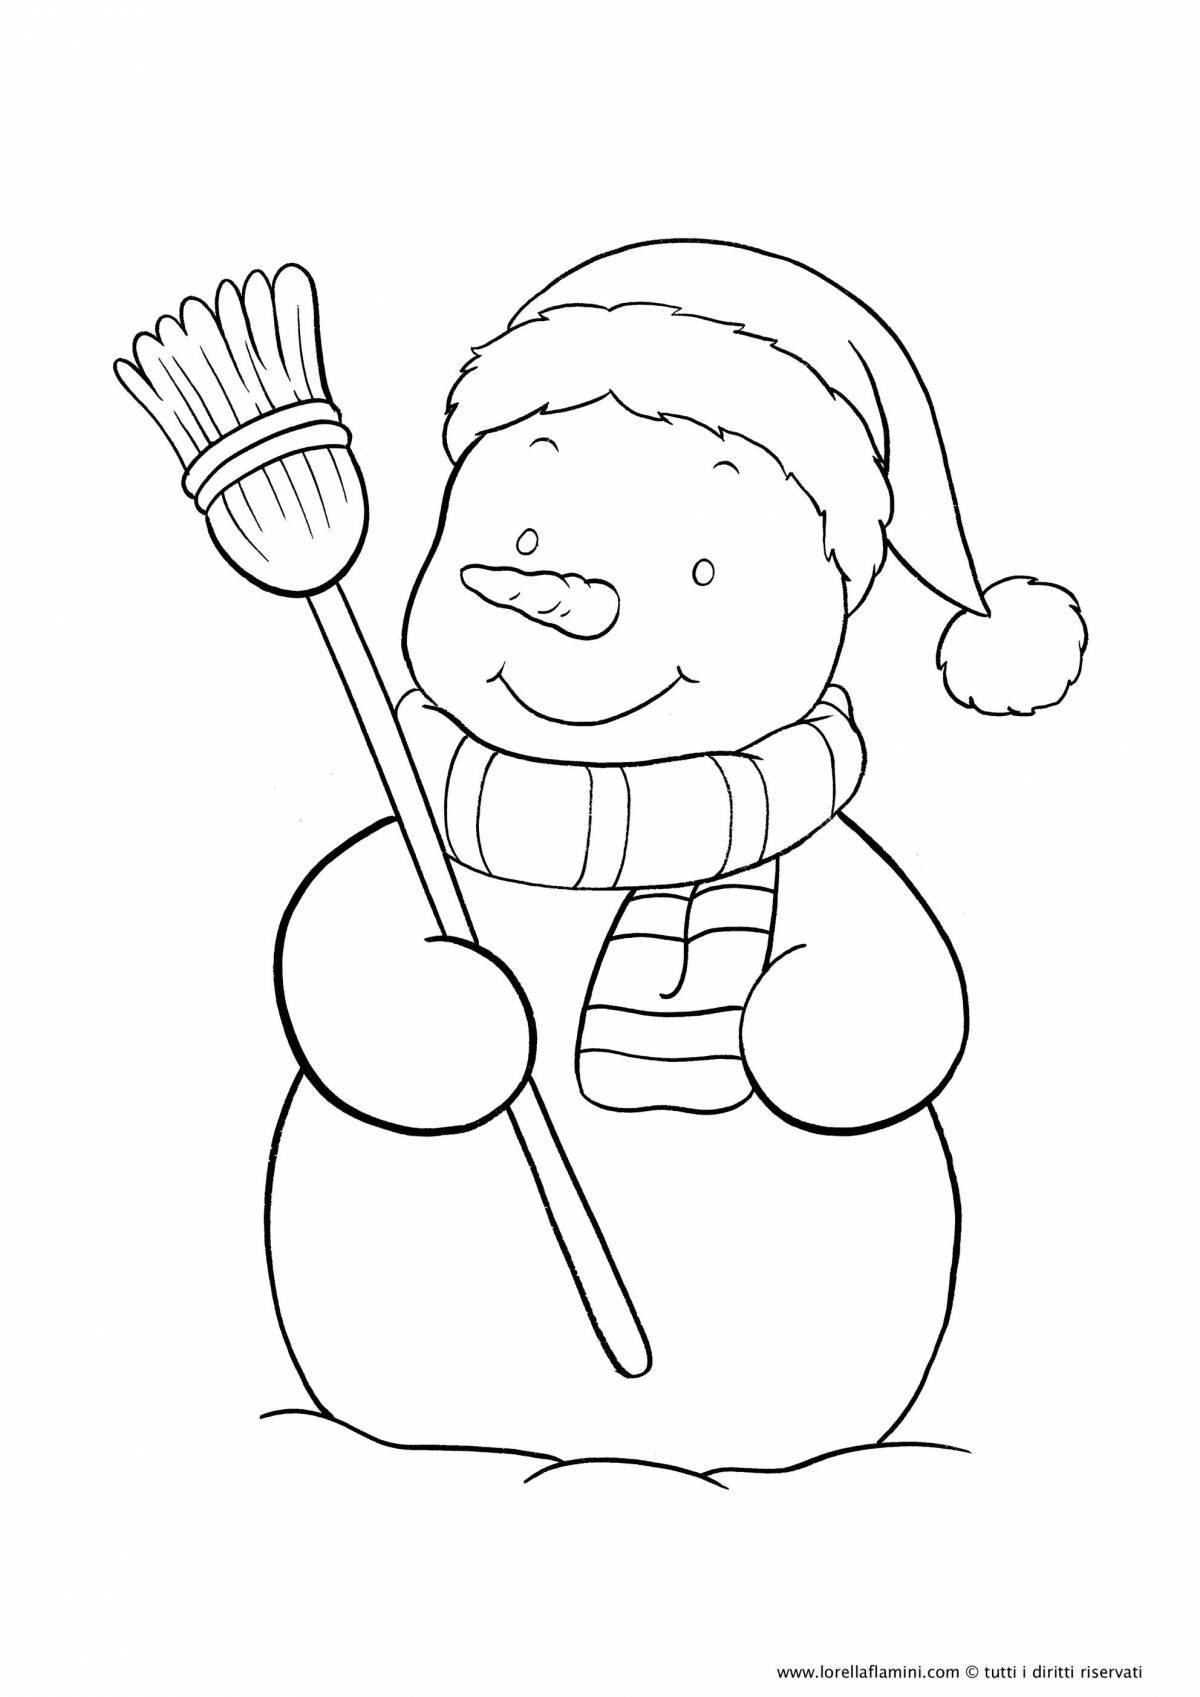 Live coloring funny snowman for kids